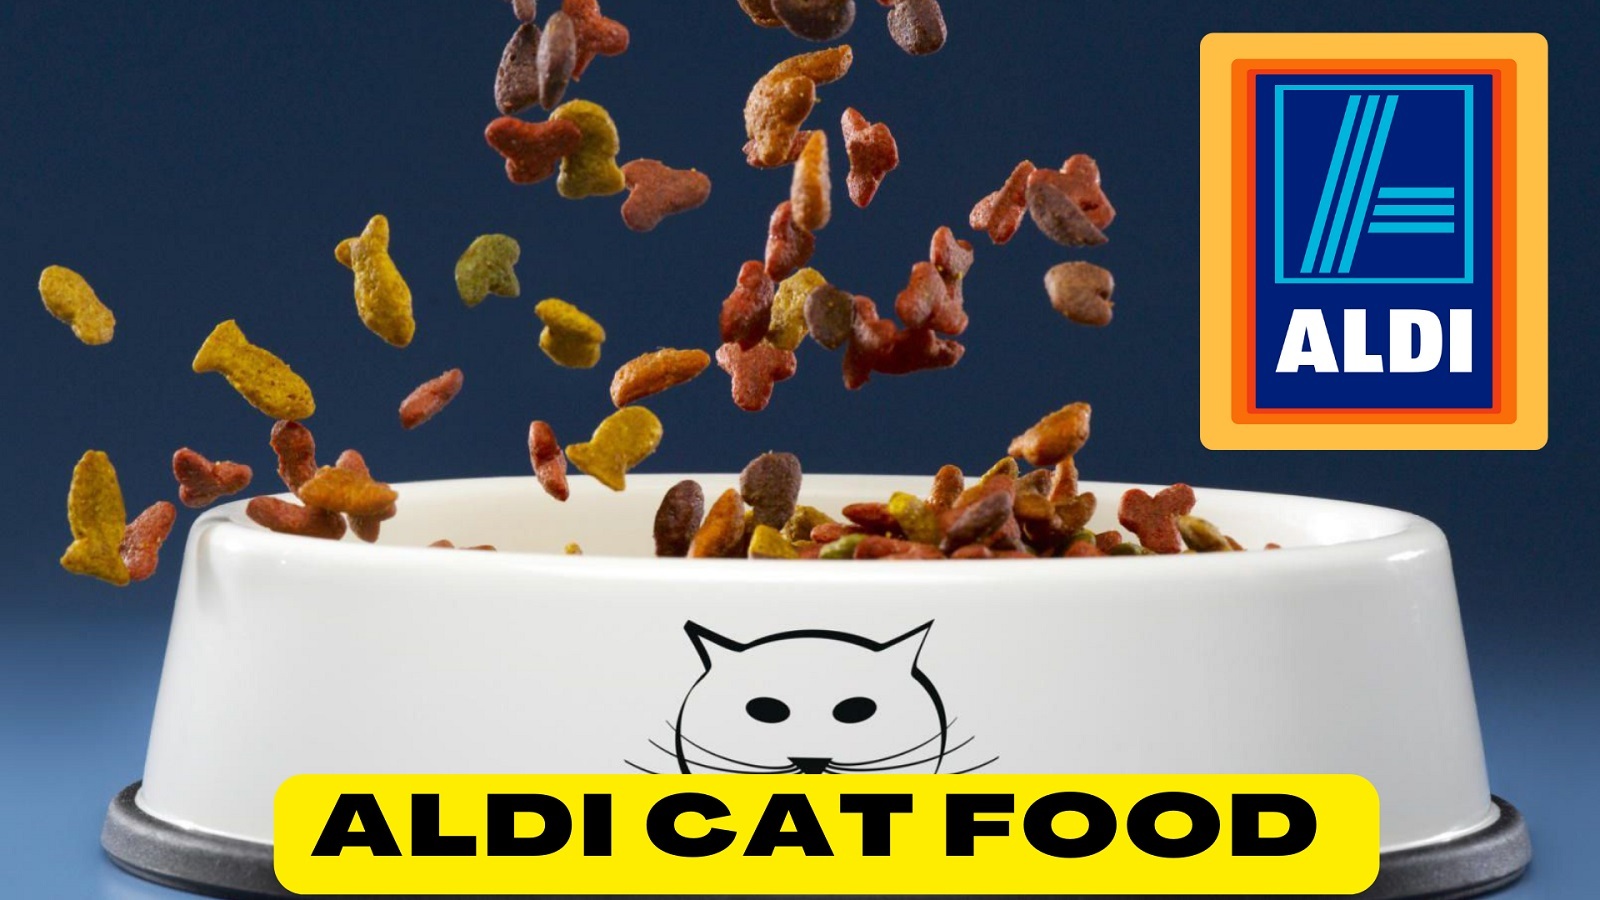 Aldi Cat Food: All You Need to Know!